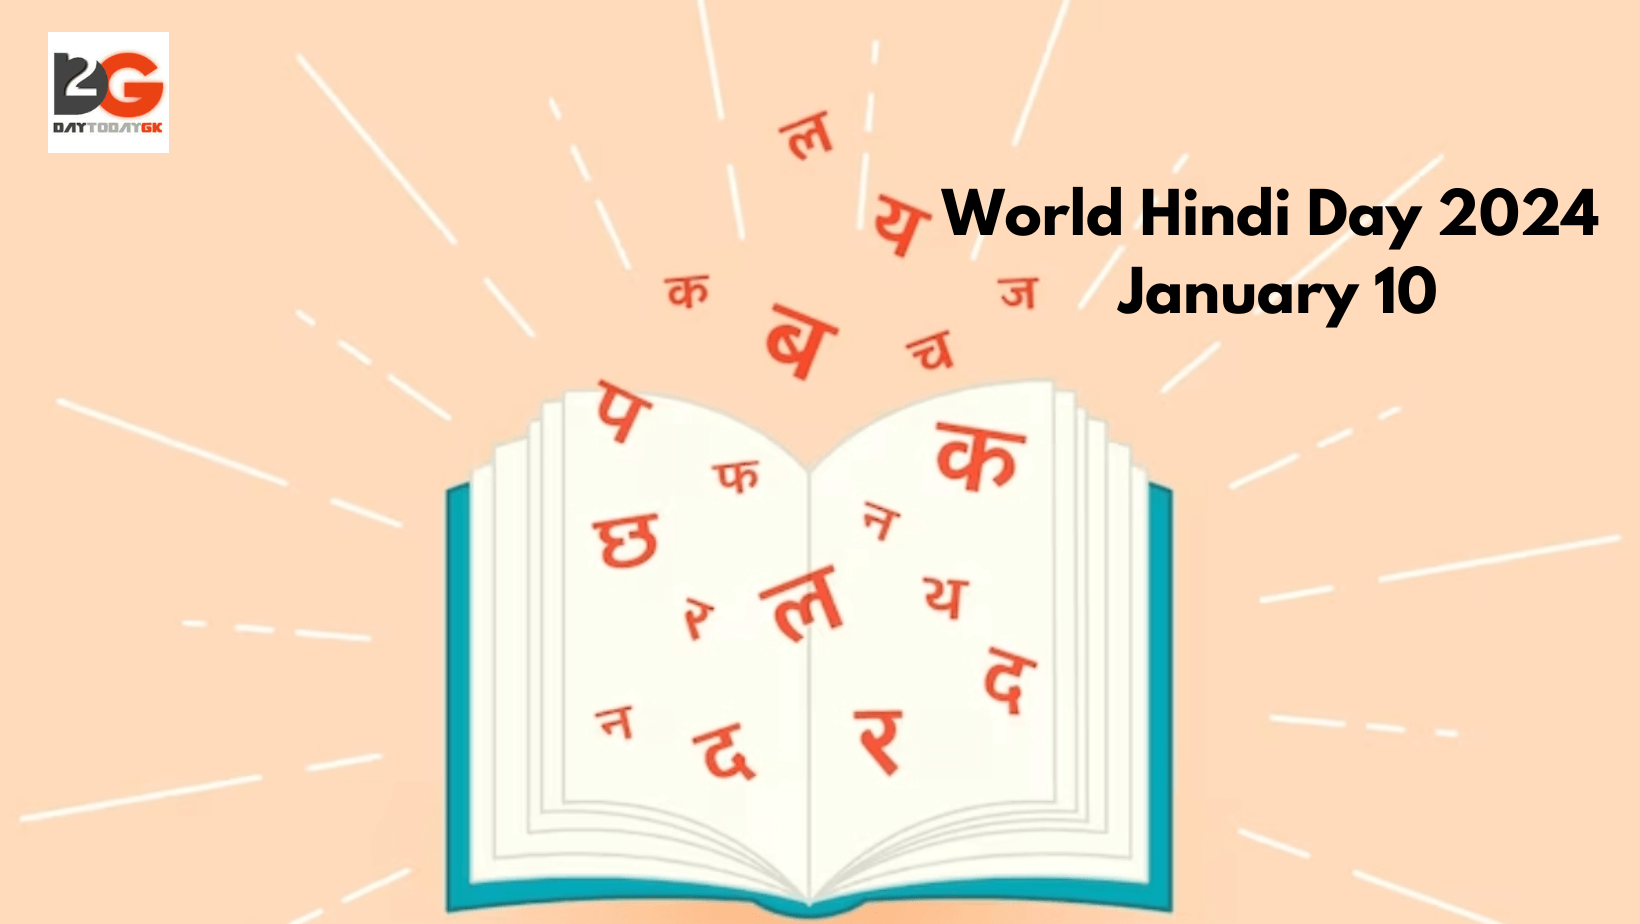 World Hindi Day 2024 is observed on January 10